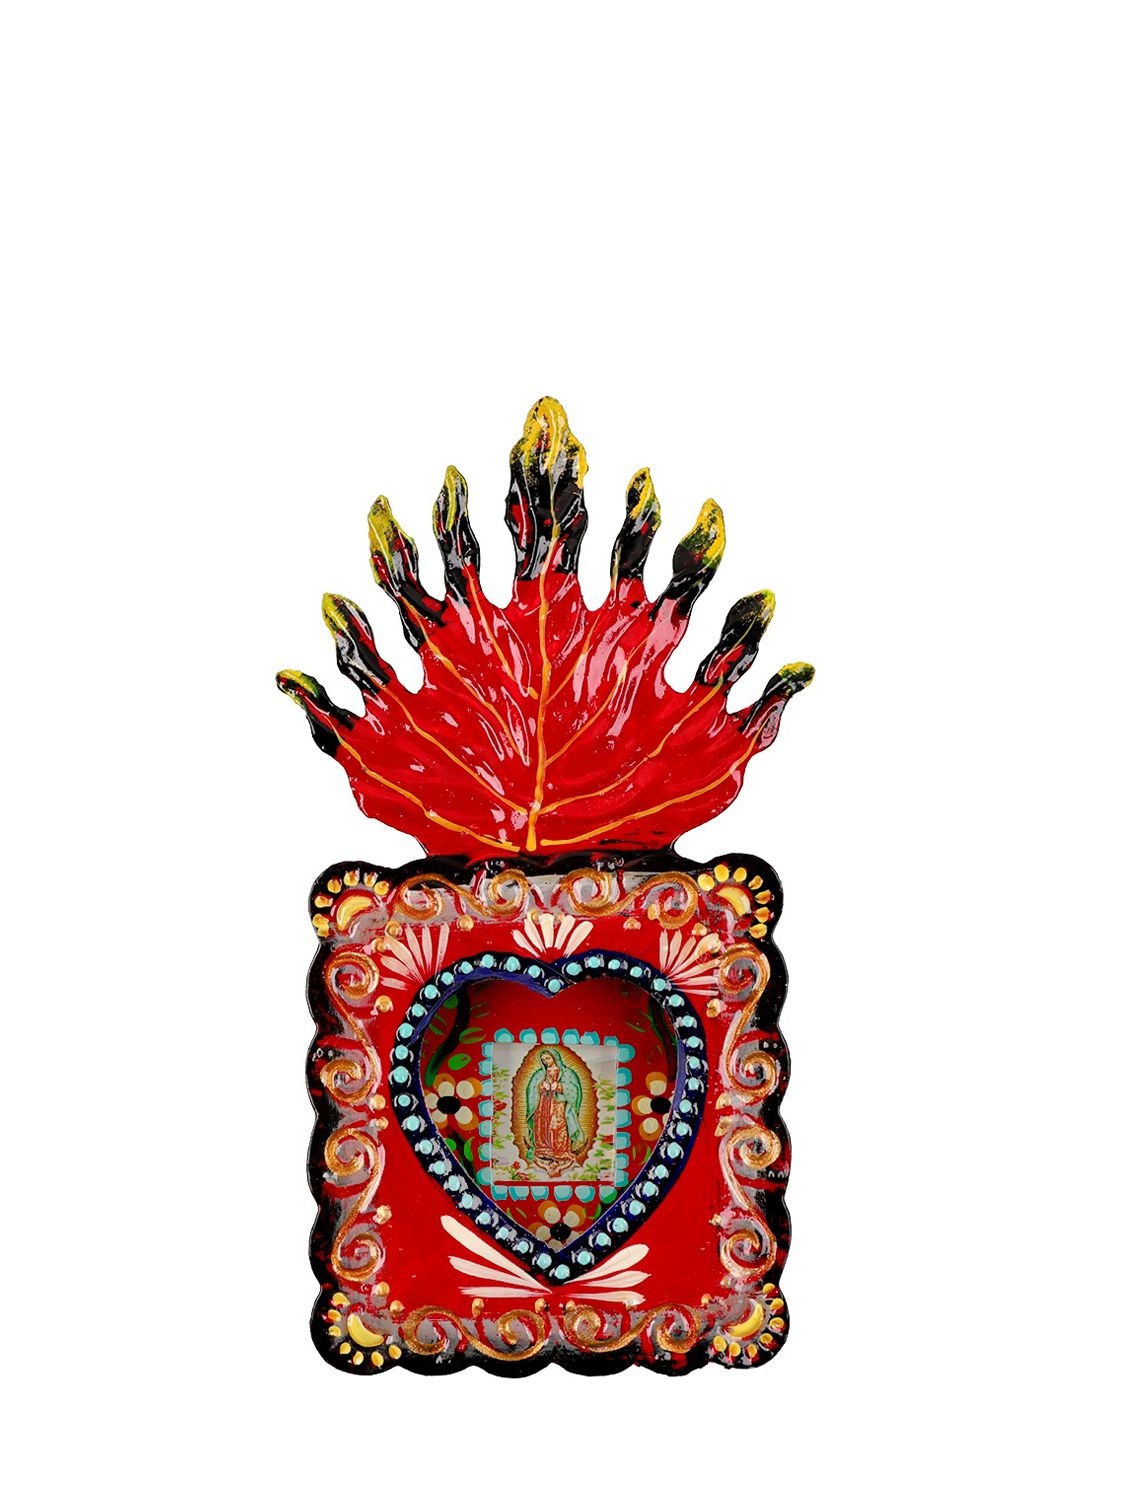 Guadalupe Flaming Niche Wall Decor